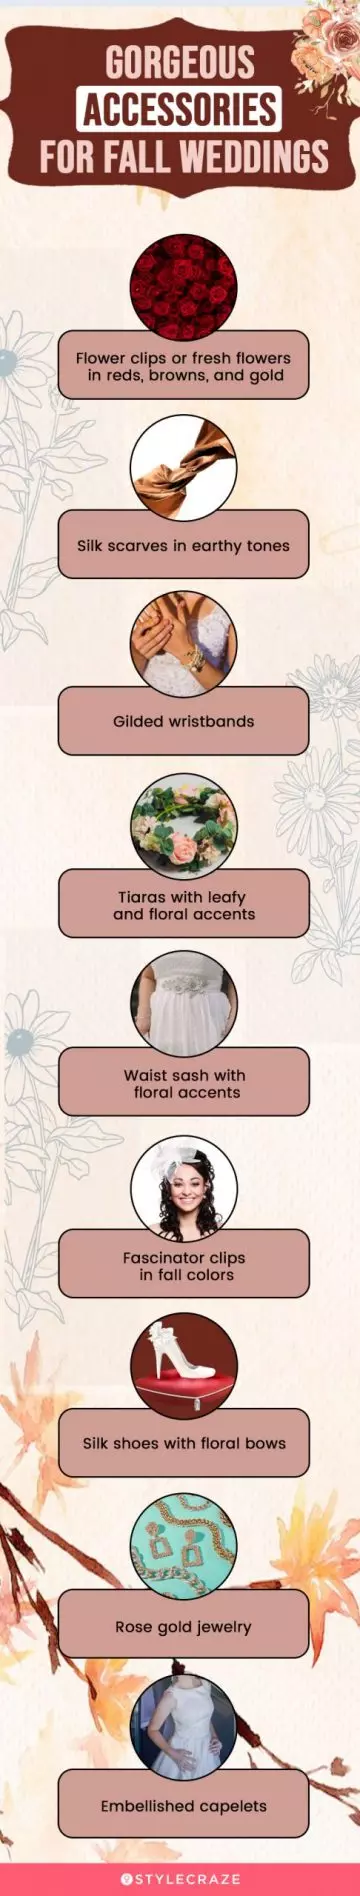 gorgeous accessories for fall weddings (infographic)